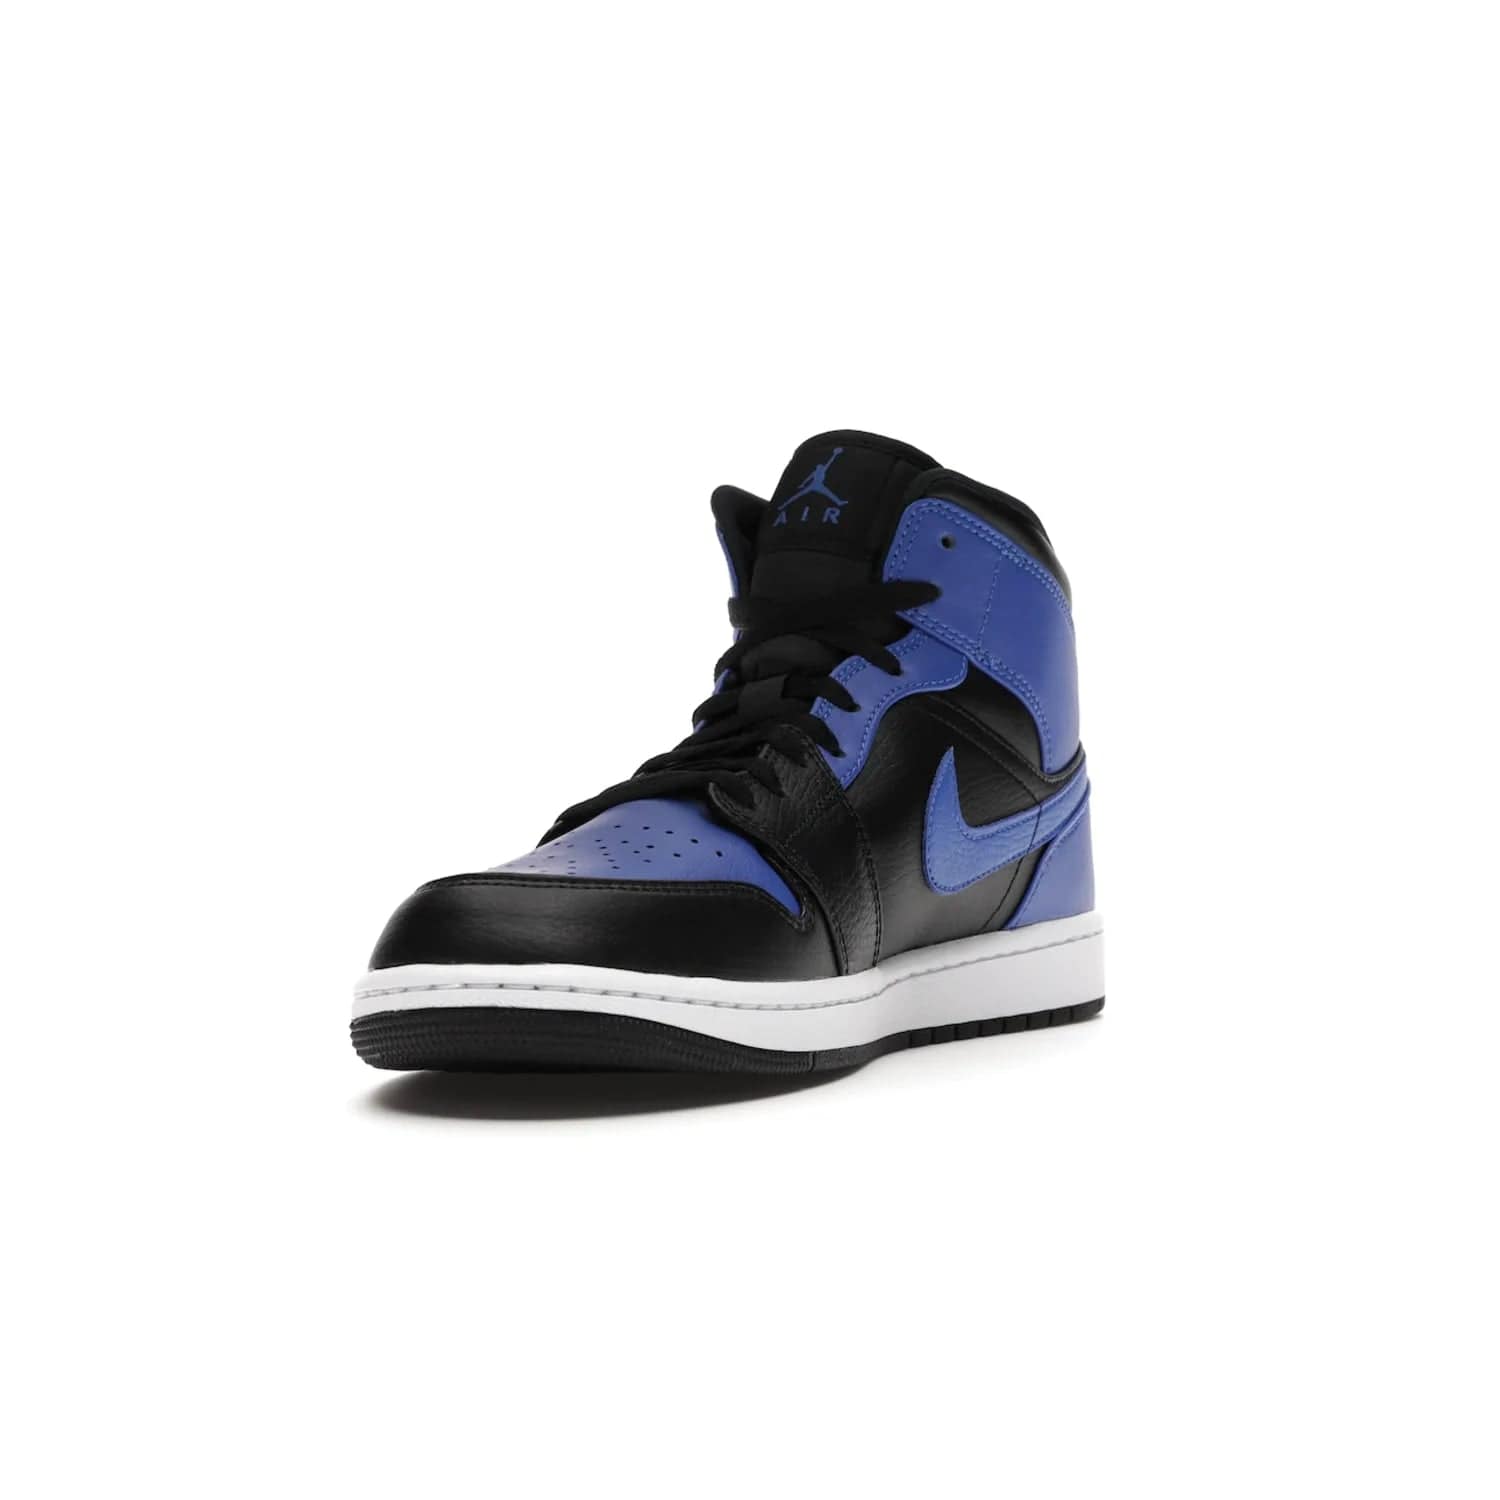 Jordan 1 Mid Hyper Royal Tumbled Leather - Image 13 - Only at www.BallersClubKickz.com - Iconic colorway of the Air Jordan 1 Mid Black Royal Tumbled Leather. Features a black tumbled leather upper, royal blue leather overlays, white midsole & black rubber outsole. Released December 2020. Adds premium style to any collection.